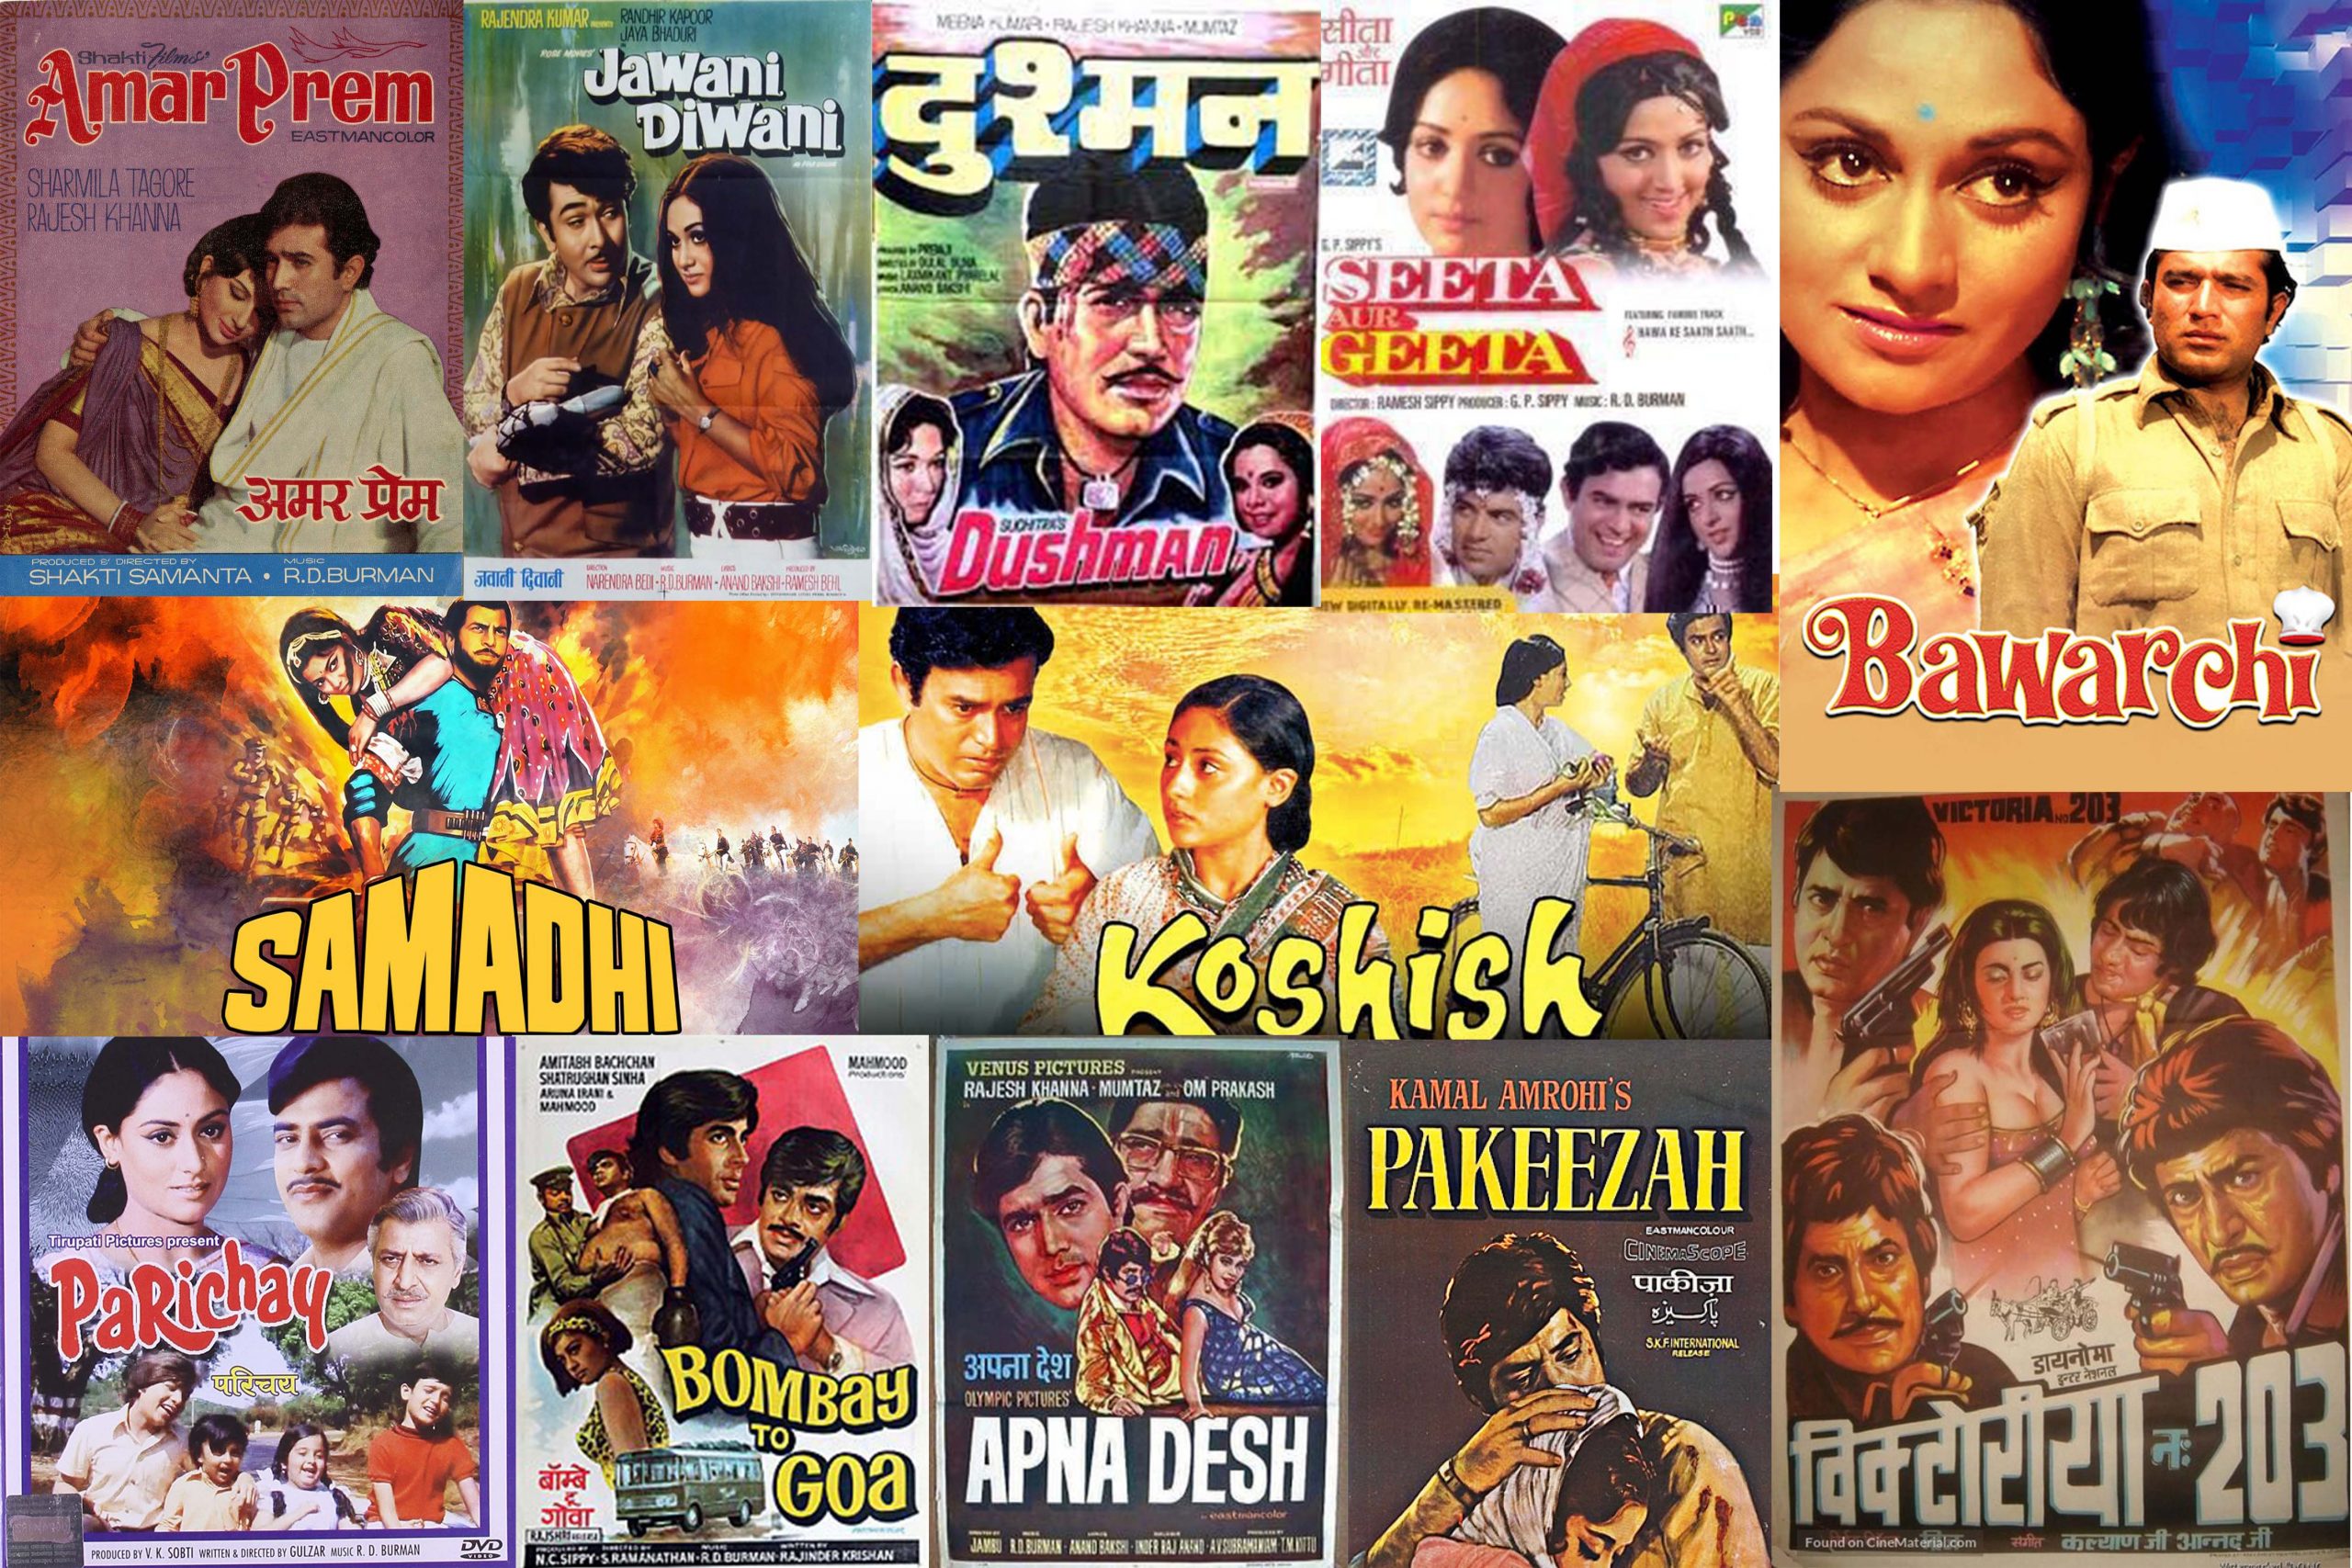 Celebrating the 1970s Cinema in Bollywood The Dawn of a New Era in Bollywood - Seniors Today